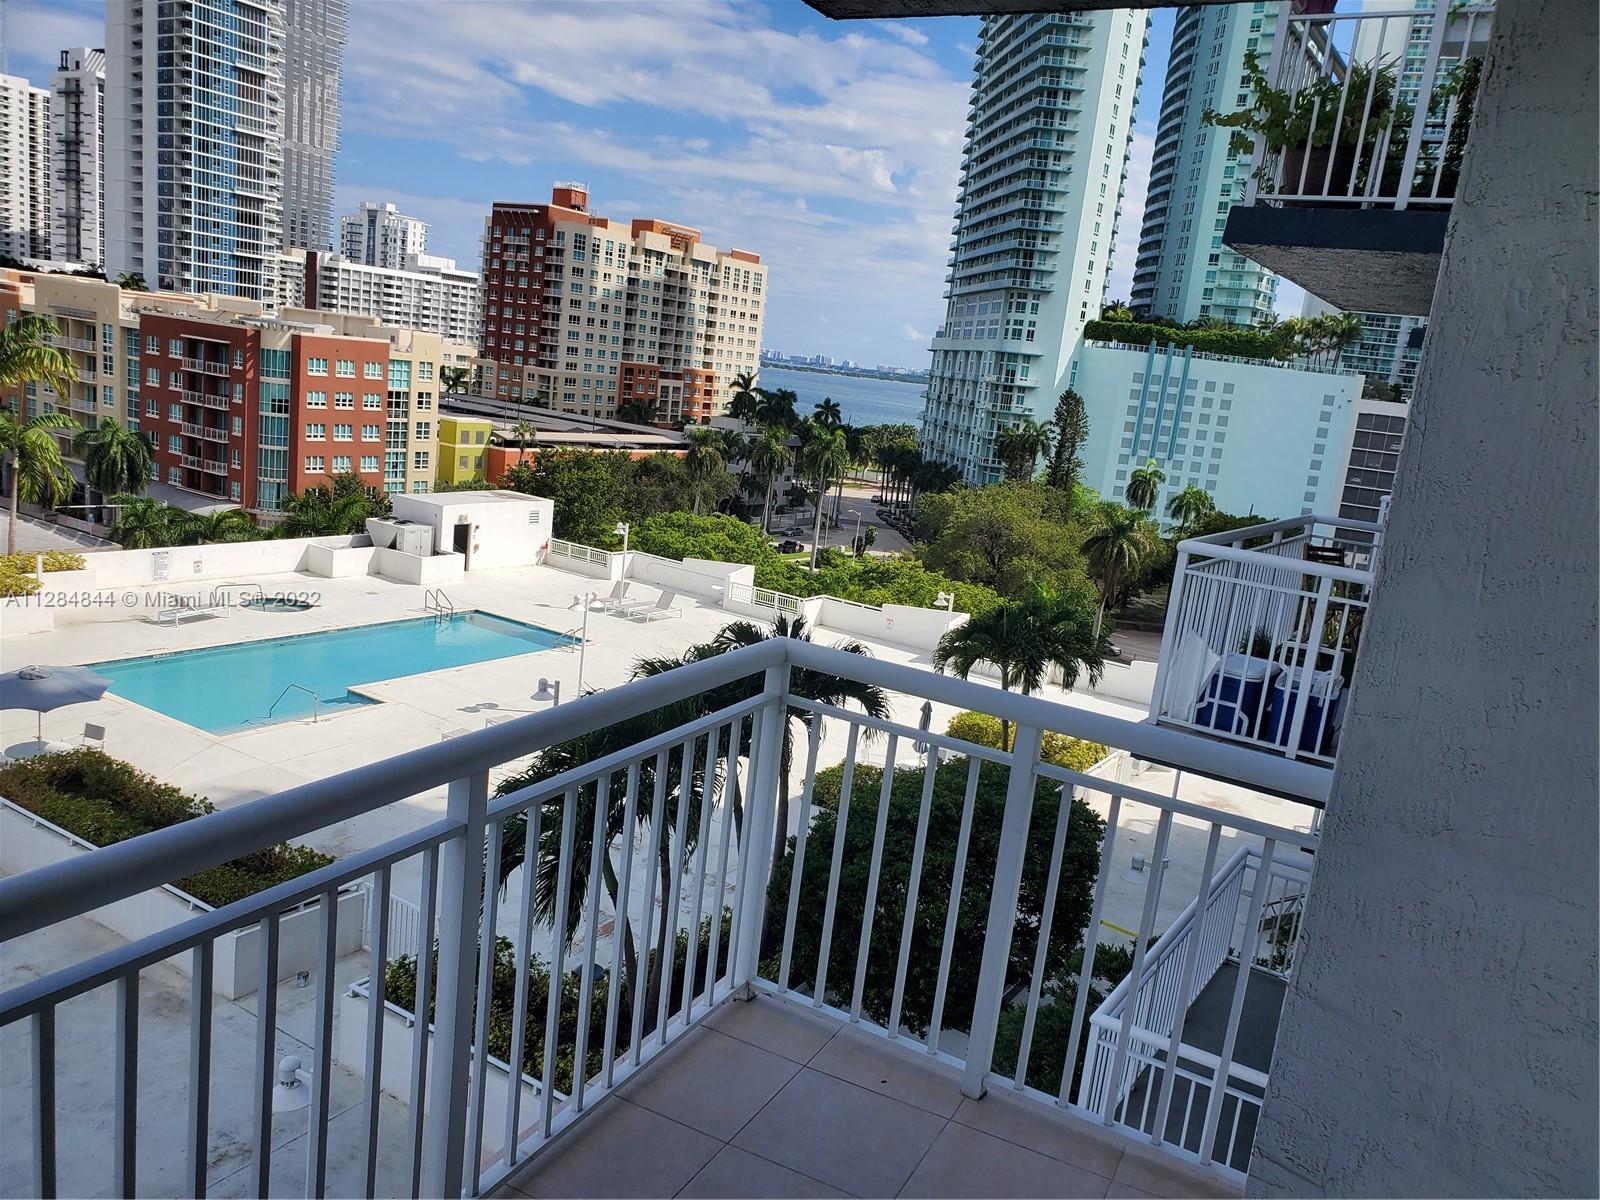 Unit is in the heart of Edgewater off of Biscayne Blvd with NE 18 ST. There are wood floors throughout, a BIG balcony with Northeast views of the pool deck, Biscayne Bay, and the city. Washer/dryer within. Rent includes basic WiFi. ONE ASSIGNED PARKING SPACE. Apartment is vacant and deep cleaned. It is walking distance to Publix, the Shops at Midtown, Wynwood, and the waterfront Margaret Pace Park. It is also a quick drive from Miami Airport and I-95. Building currently undergoing pool deck renovation for one year and routine exterior restoration and is priced with this consideration.